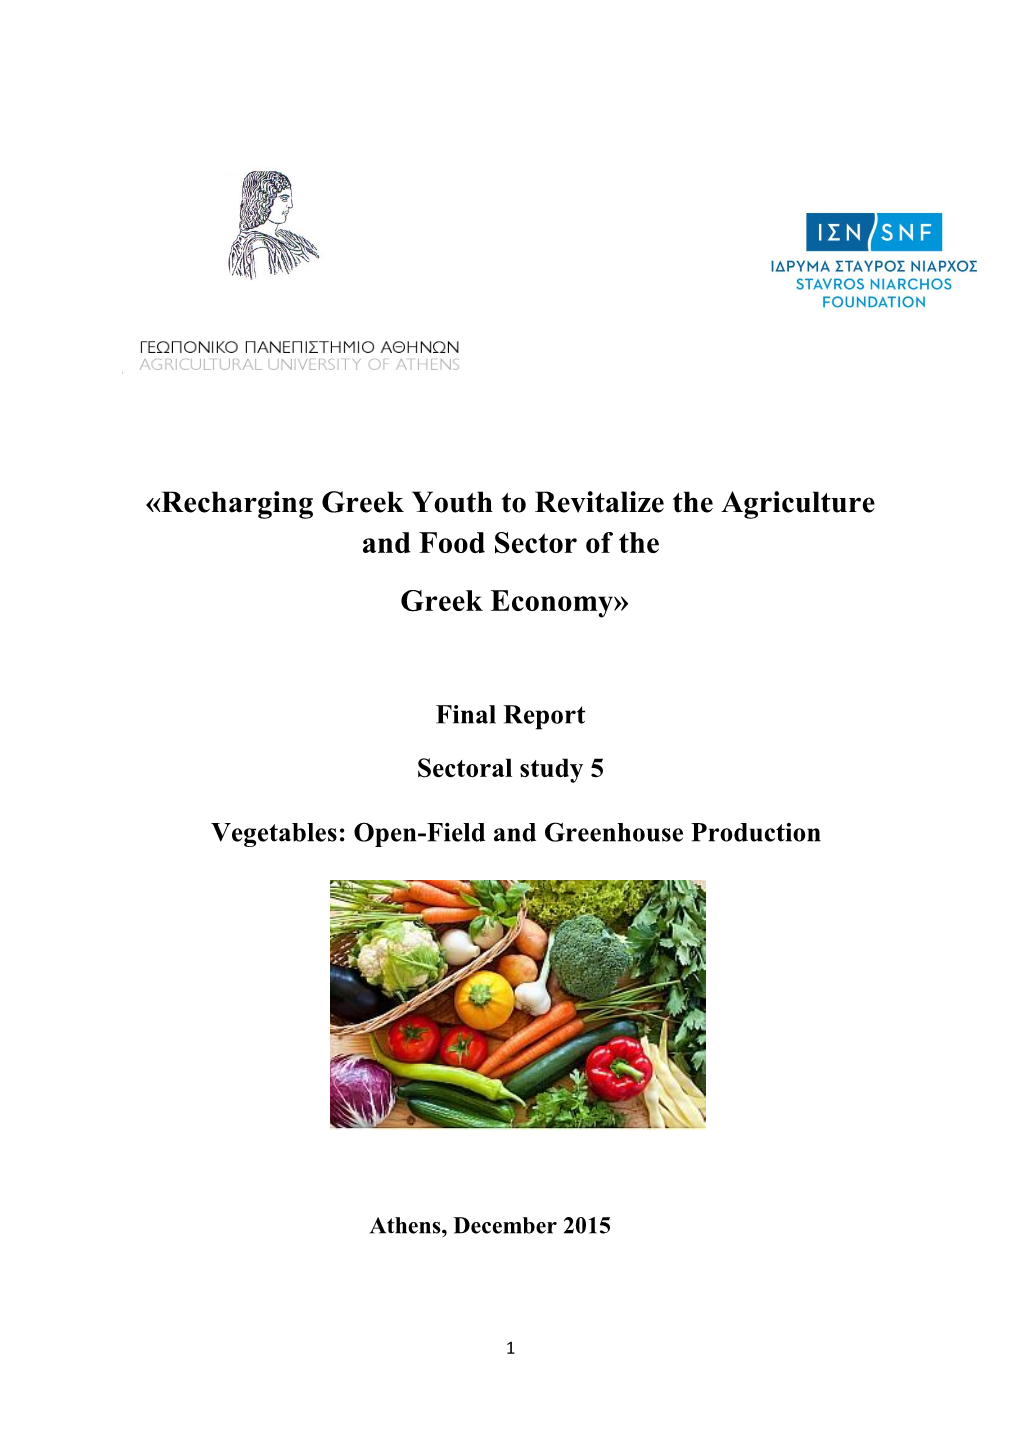 Vegetables: Open-Field and Greenhouse Production